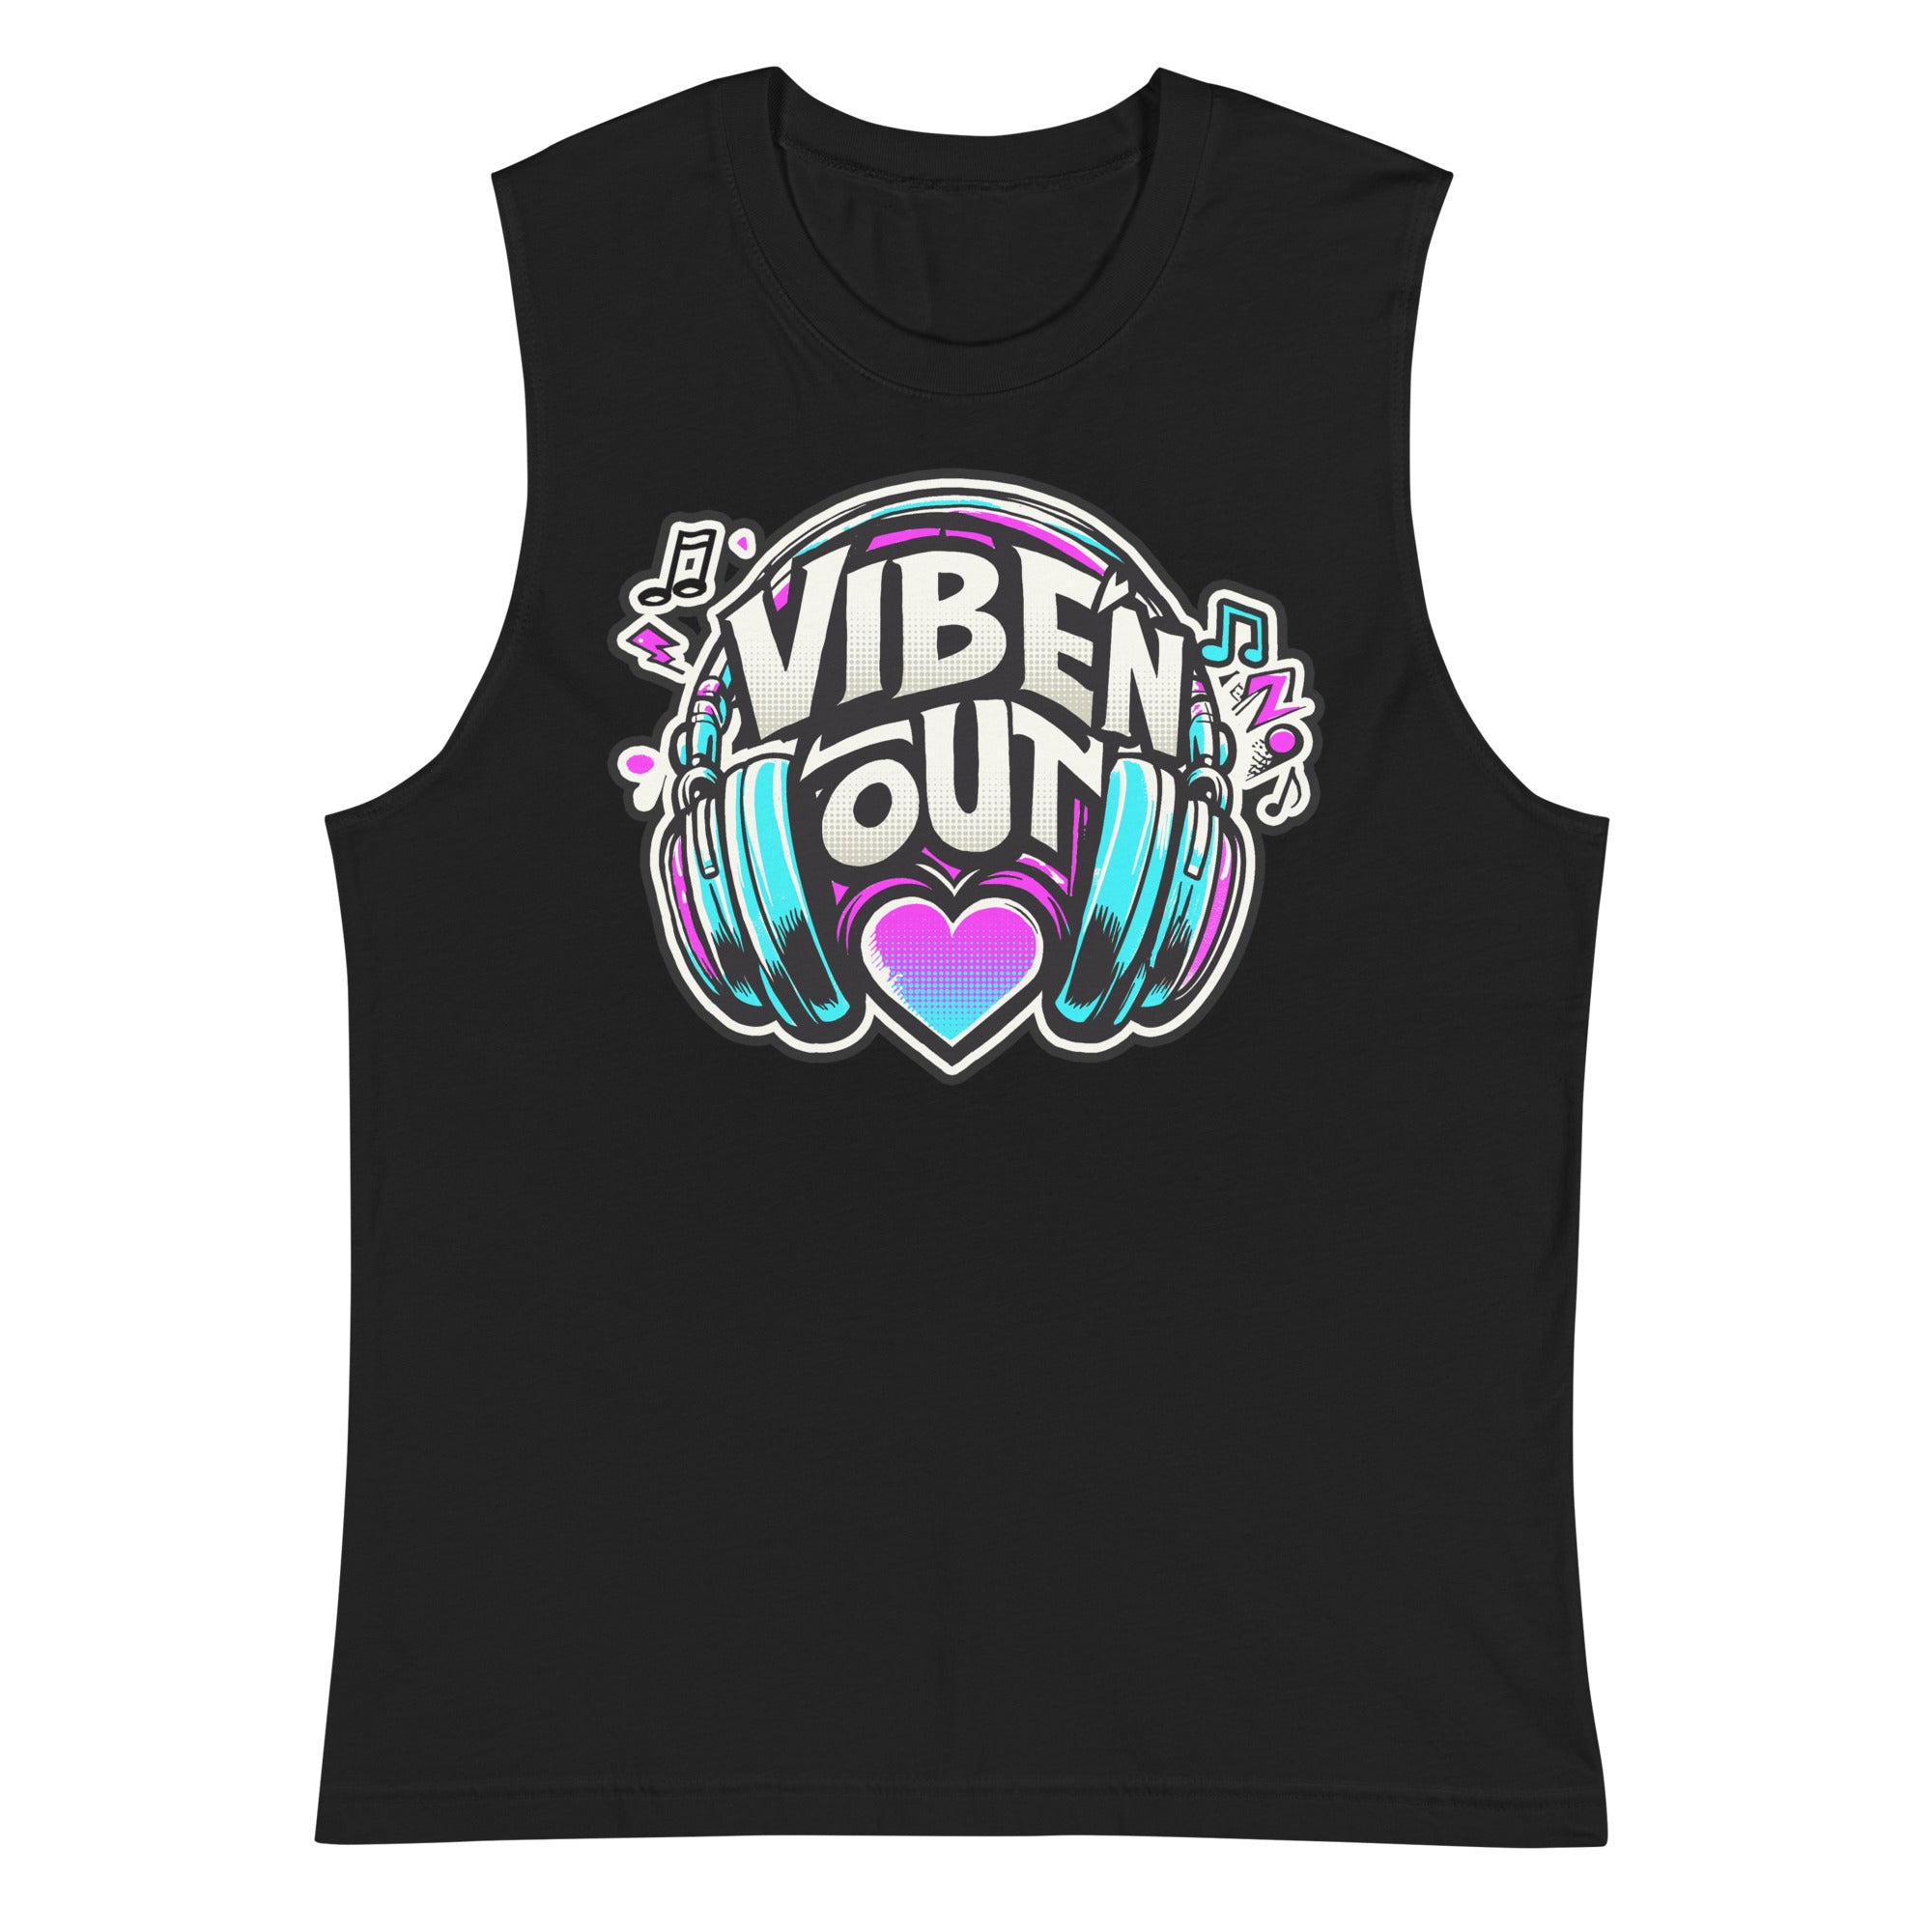 VIBE'N OUT - Muscle Shirt